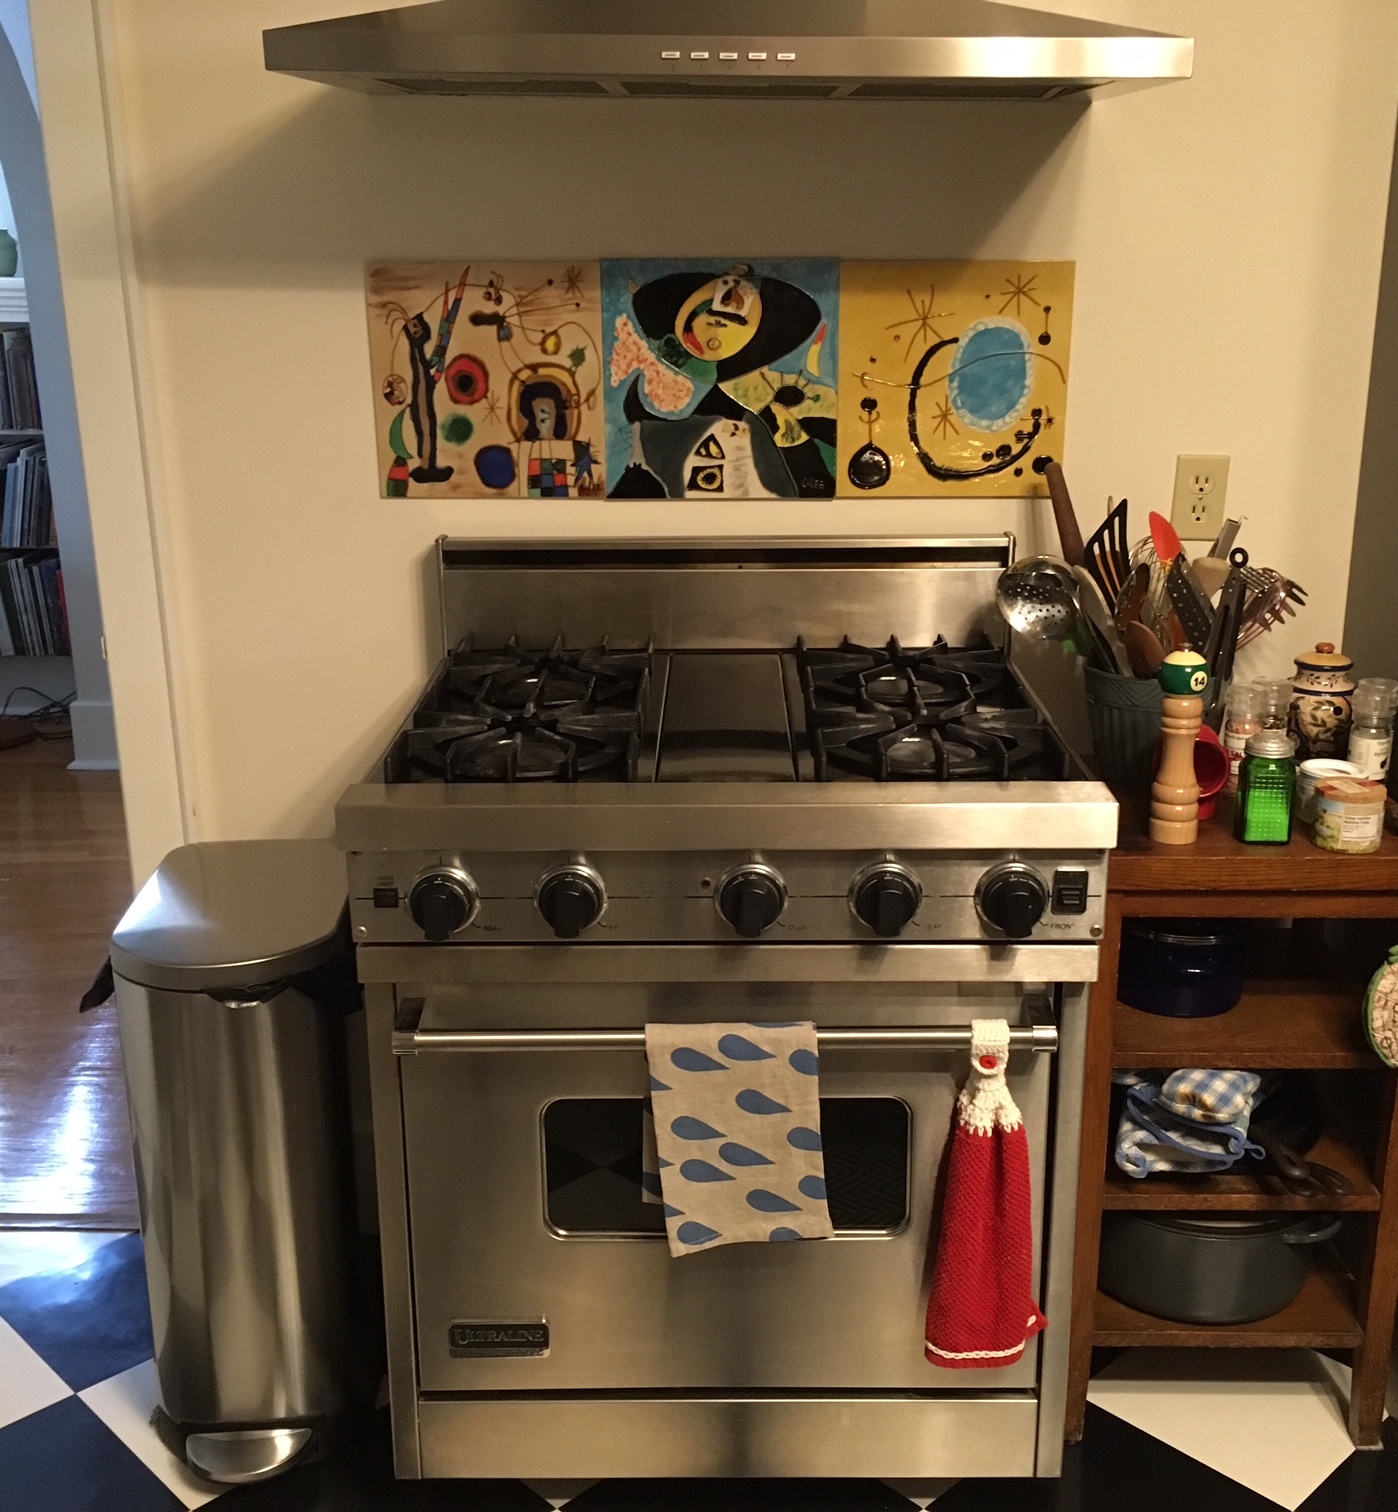 My decades-old stove